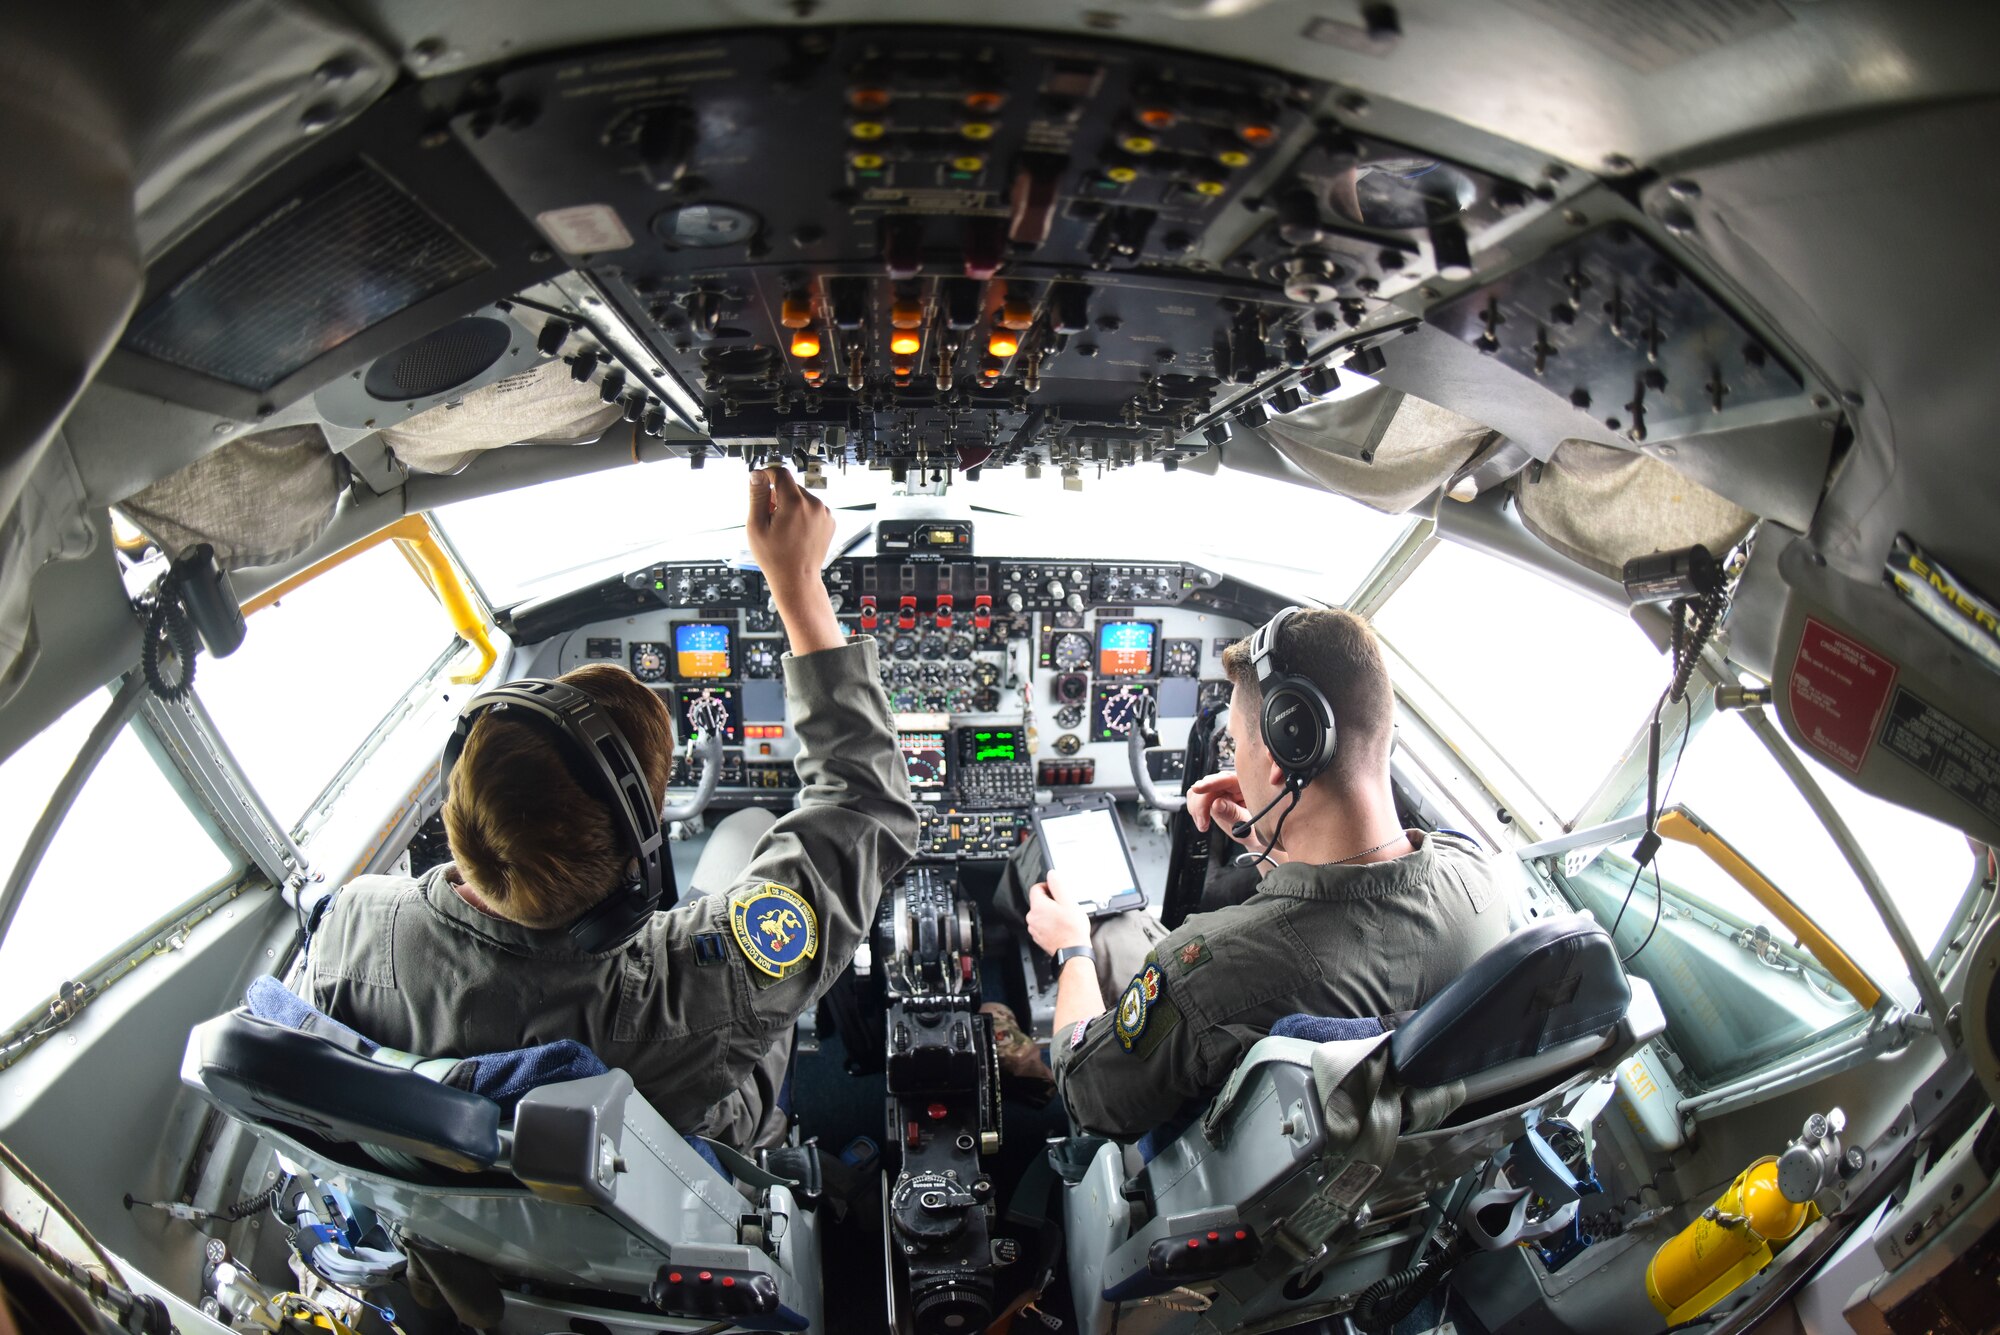 U.S. Air Force Maj. Patrick Hanson and Capt. Brendan Keiper, 351st Air Refueling Squadron pilots,perform a preflight checklist before a training mission supporting Exercise Baltic Operations at RAF Mildenhall, England, June 19, 2019. BALTOPS is an exercise involving approximately 11,600 maritime, ground and air force personnel from 18 countries. (U.S. Air Force photo by Airman 1st Class Joseph Barron)